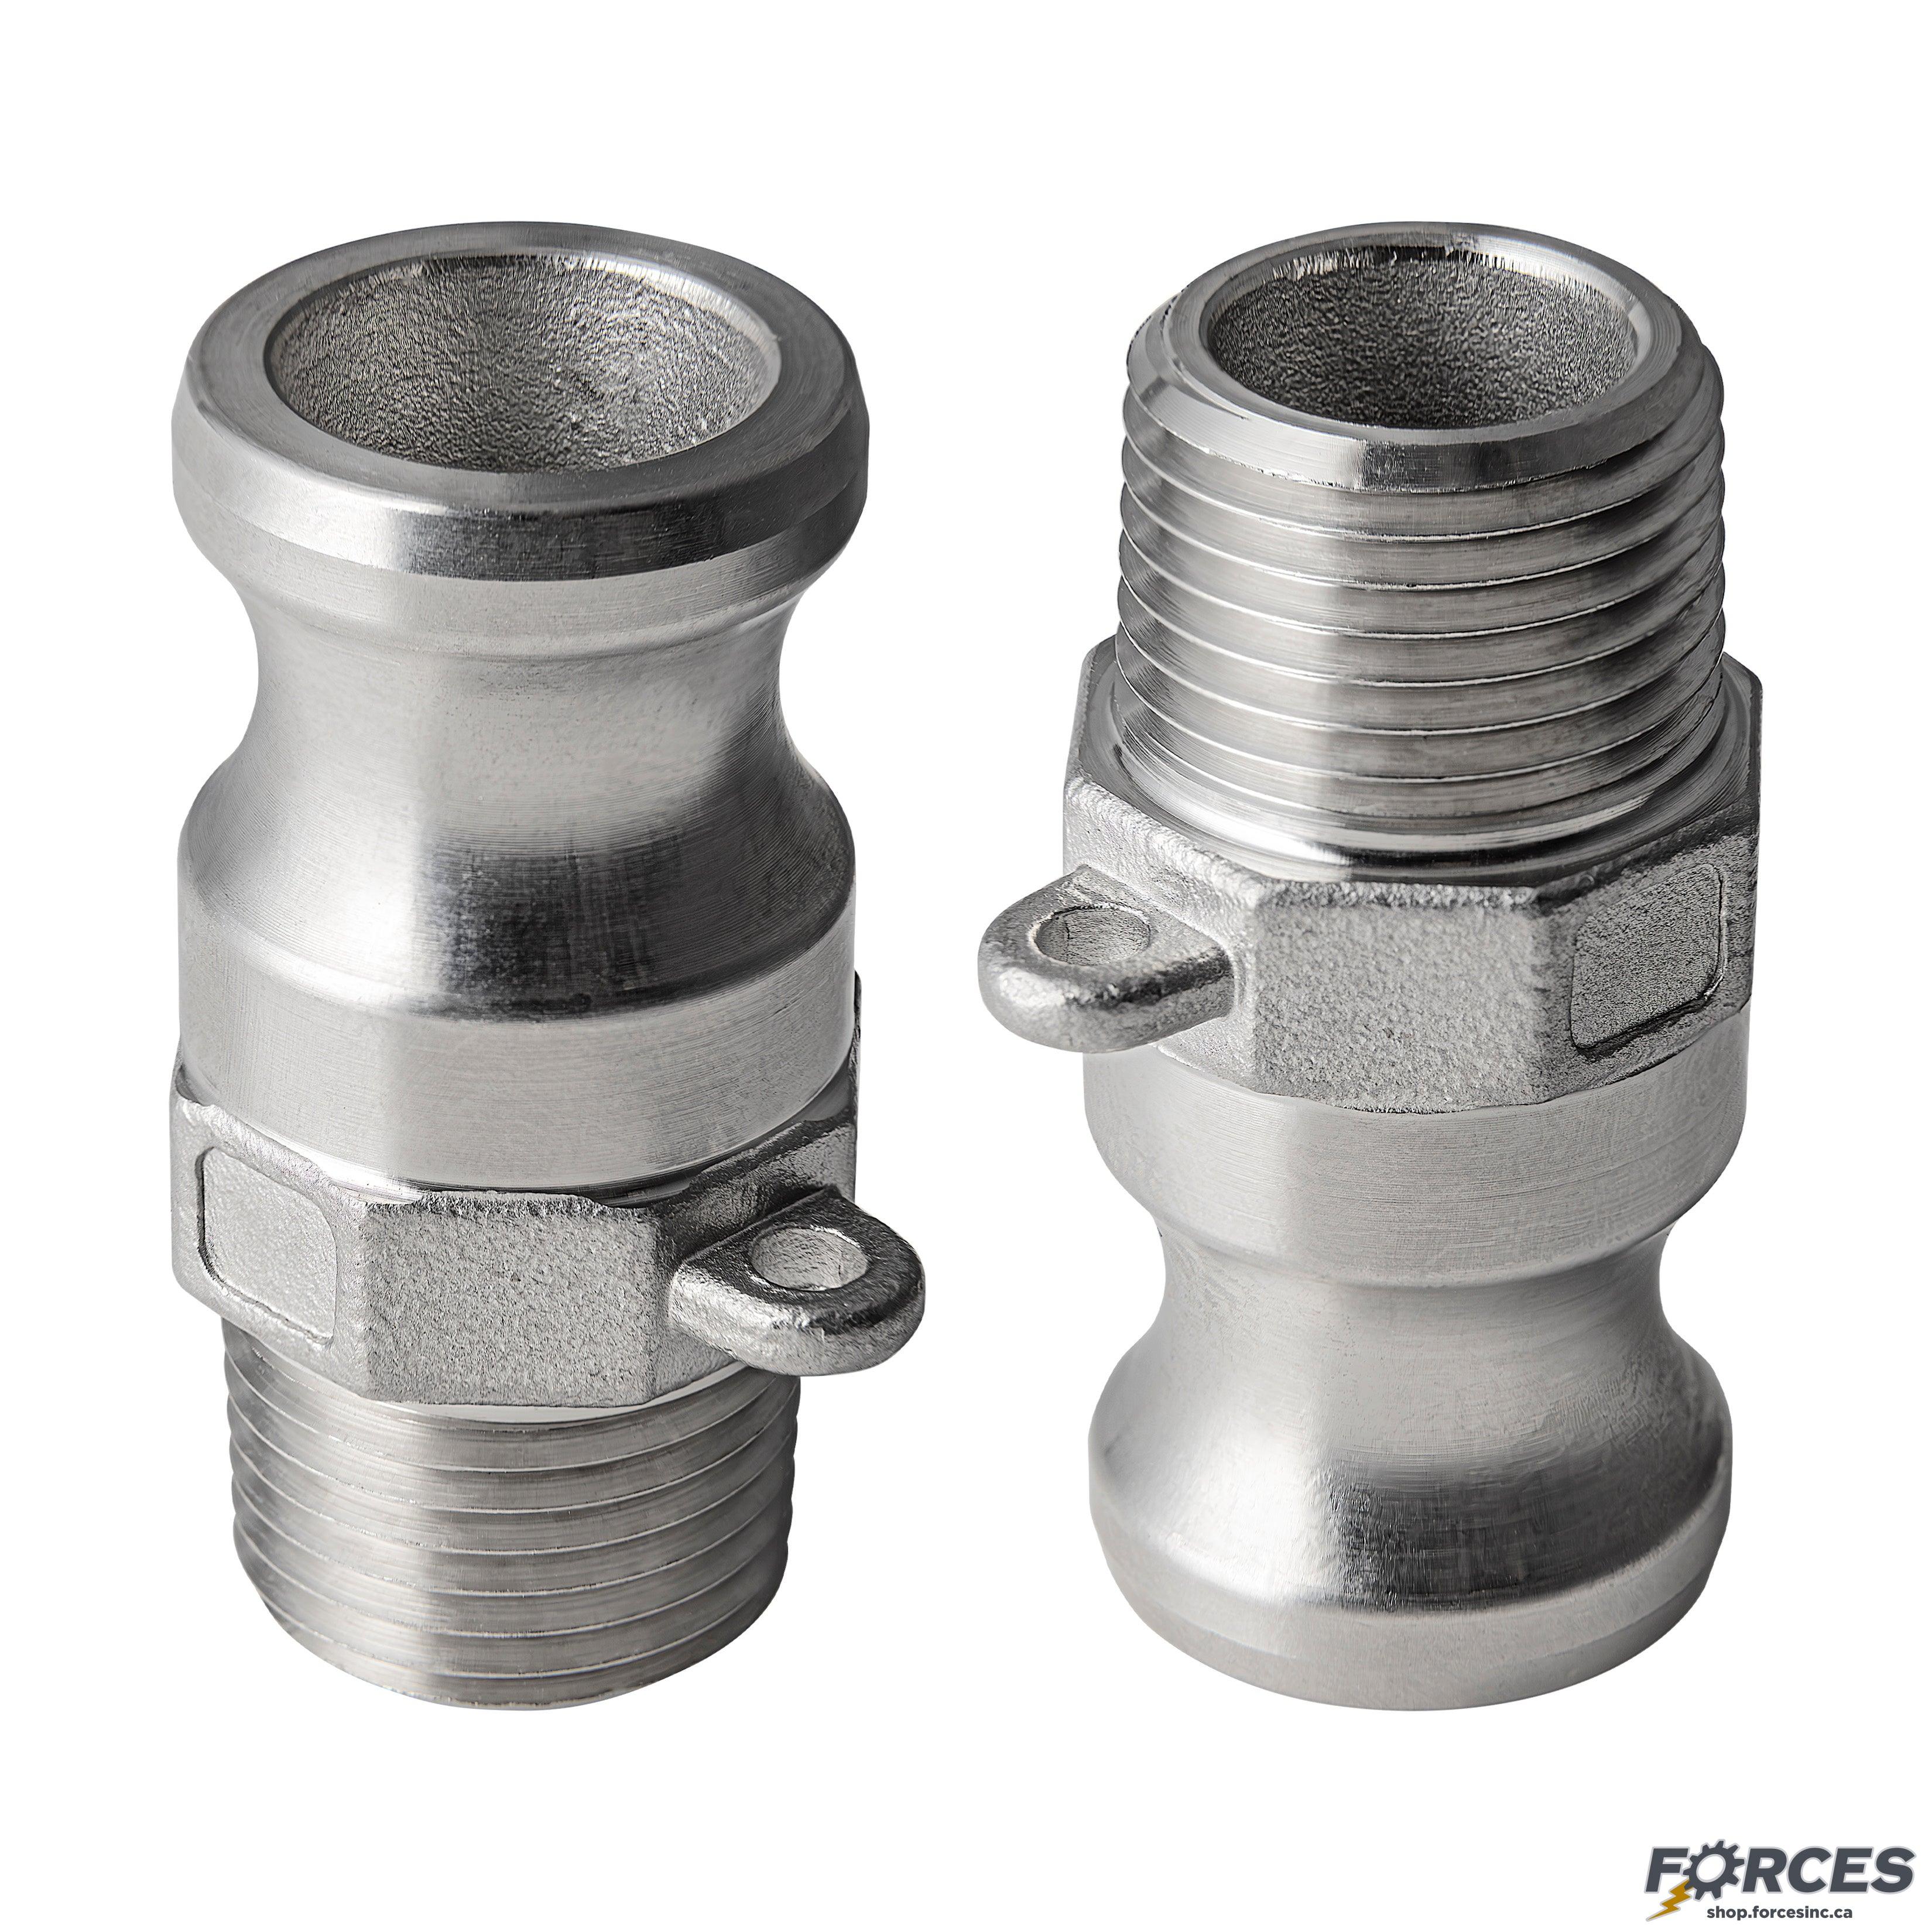 1" Type F Camlock Fitting Stainless Steel 316 - Forces Inc